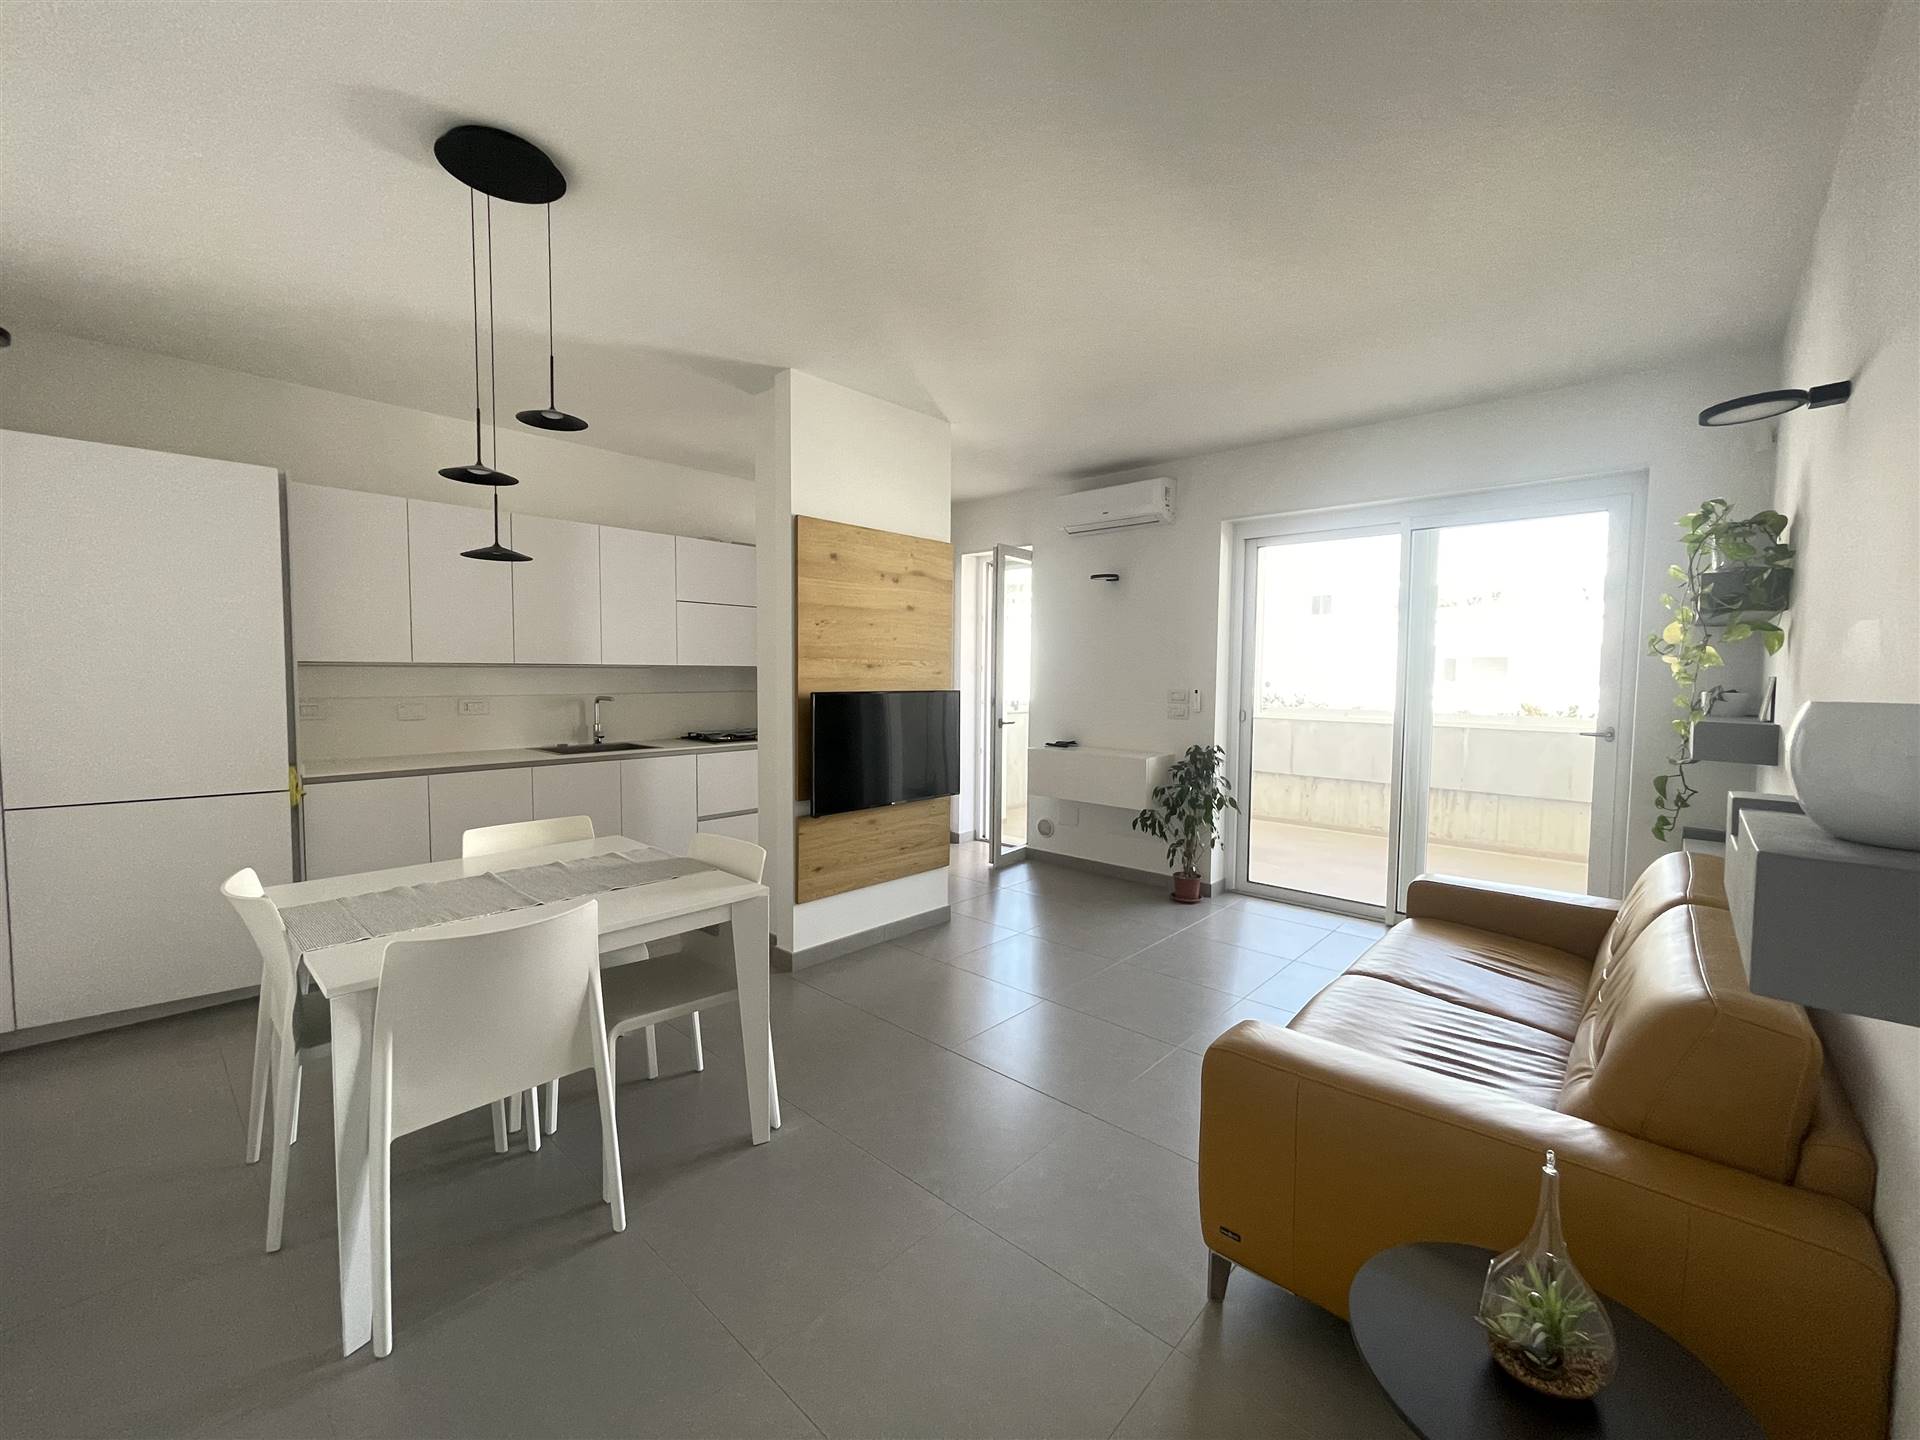 SETTELACQUARE, LECCE, Apartment for sale of 80 Sq. mt., New construction, Heating To floor, Energetic class: A+, Epi: 13,87 kwh/m2 year, placed at 2° 